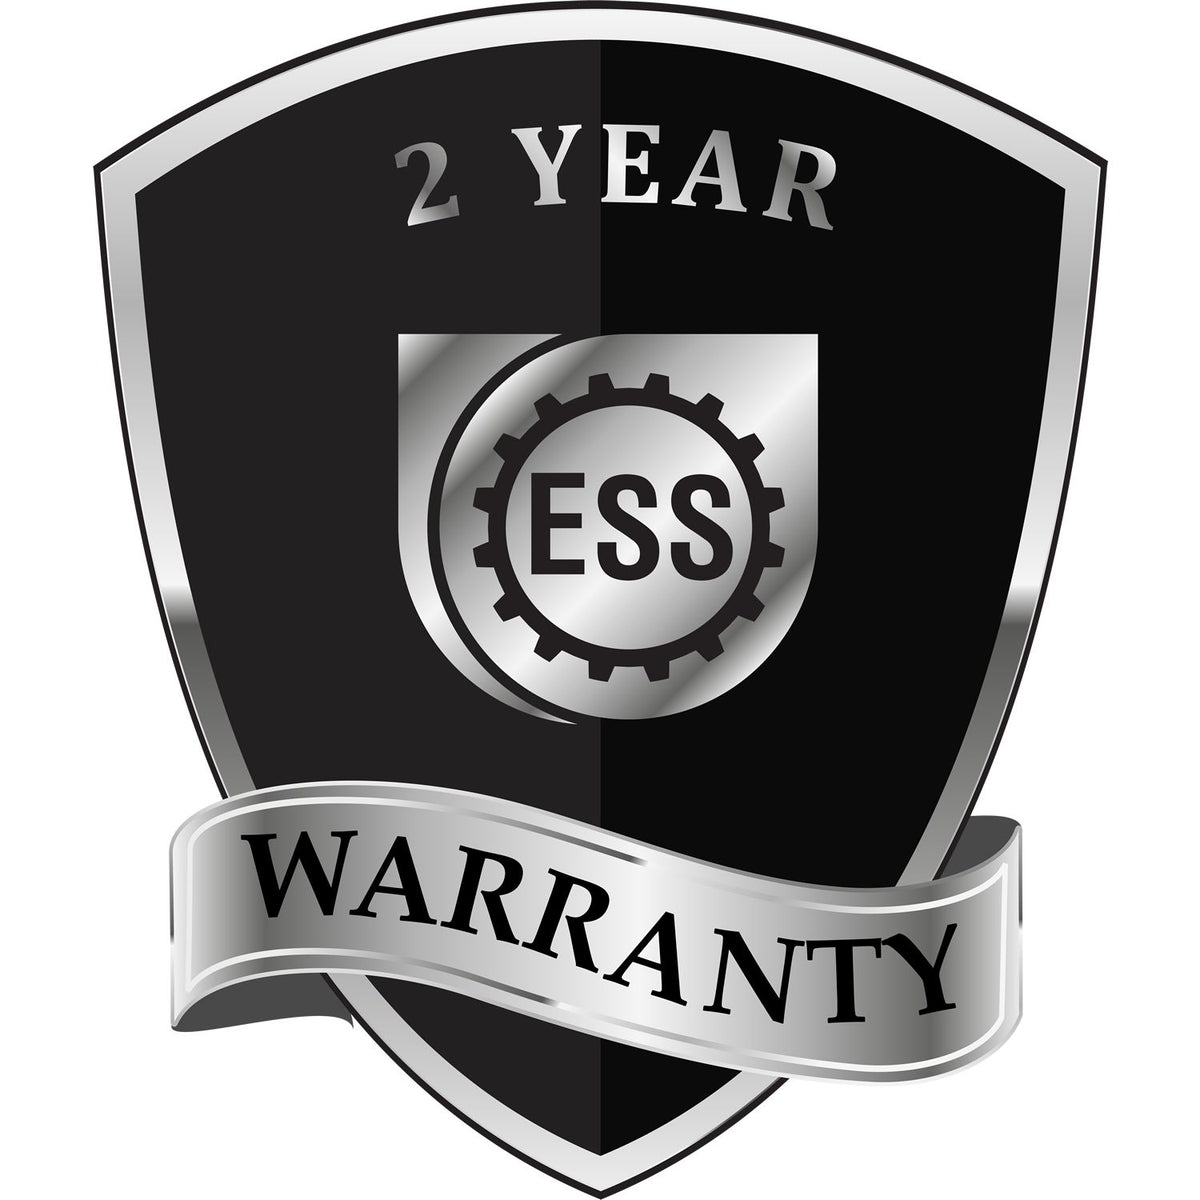 A black and silver badge or emblem showing warranty information for the Long Reach North Carolina Geology Seal